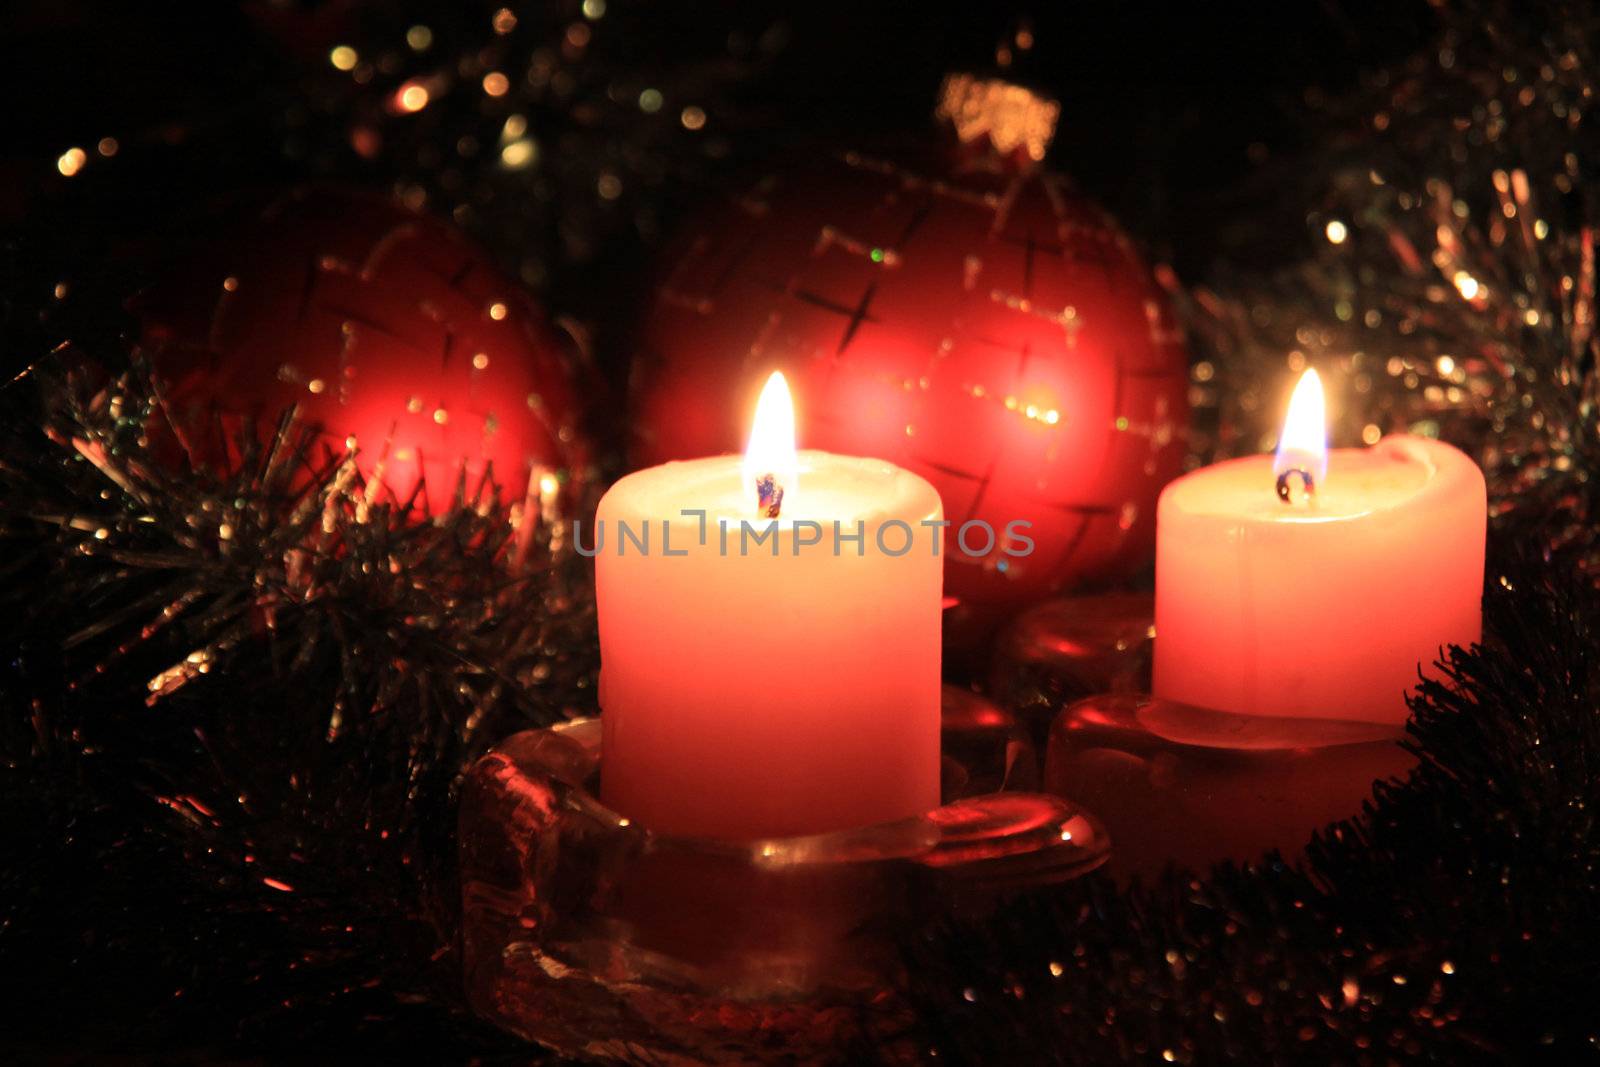 Christmas candles against a tinsel and red spheres

